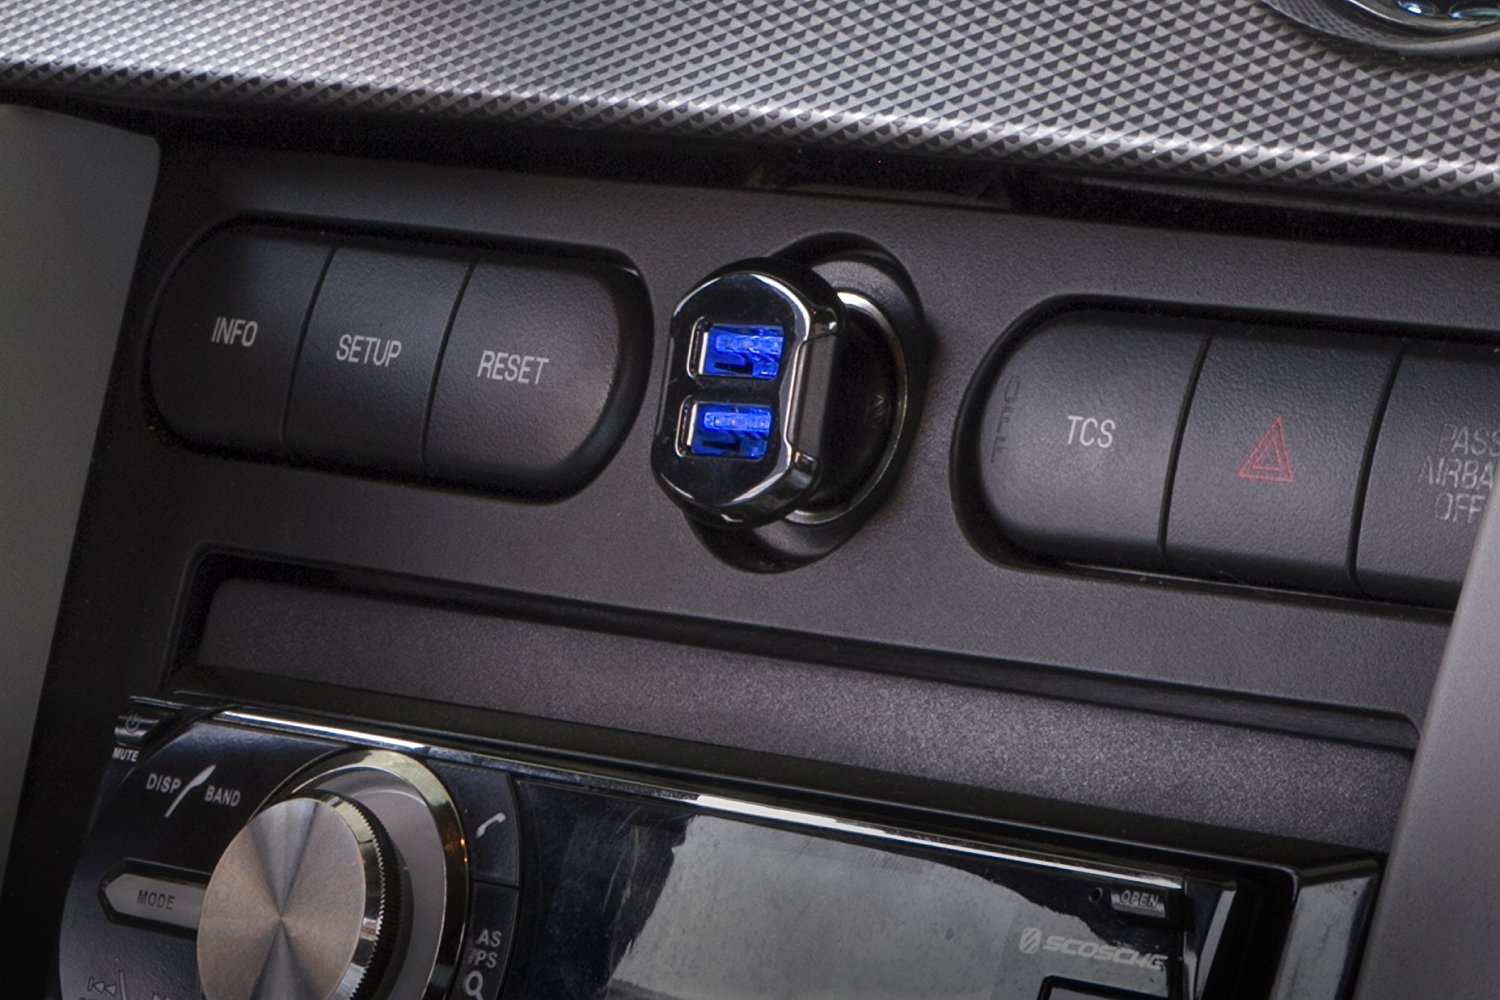 Cool Car Accessories That Transform Your Car Into a High-Tech Ride